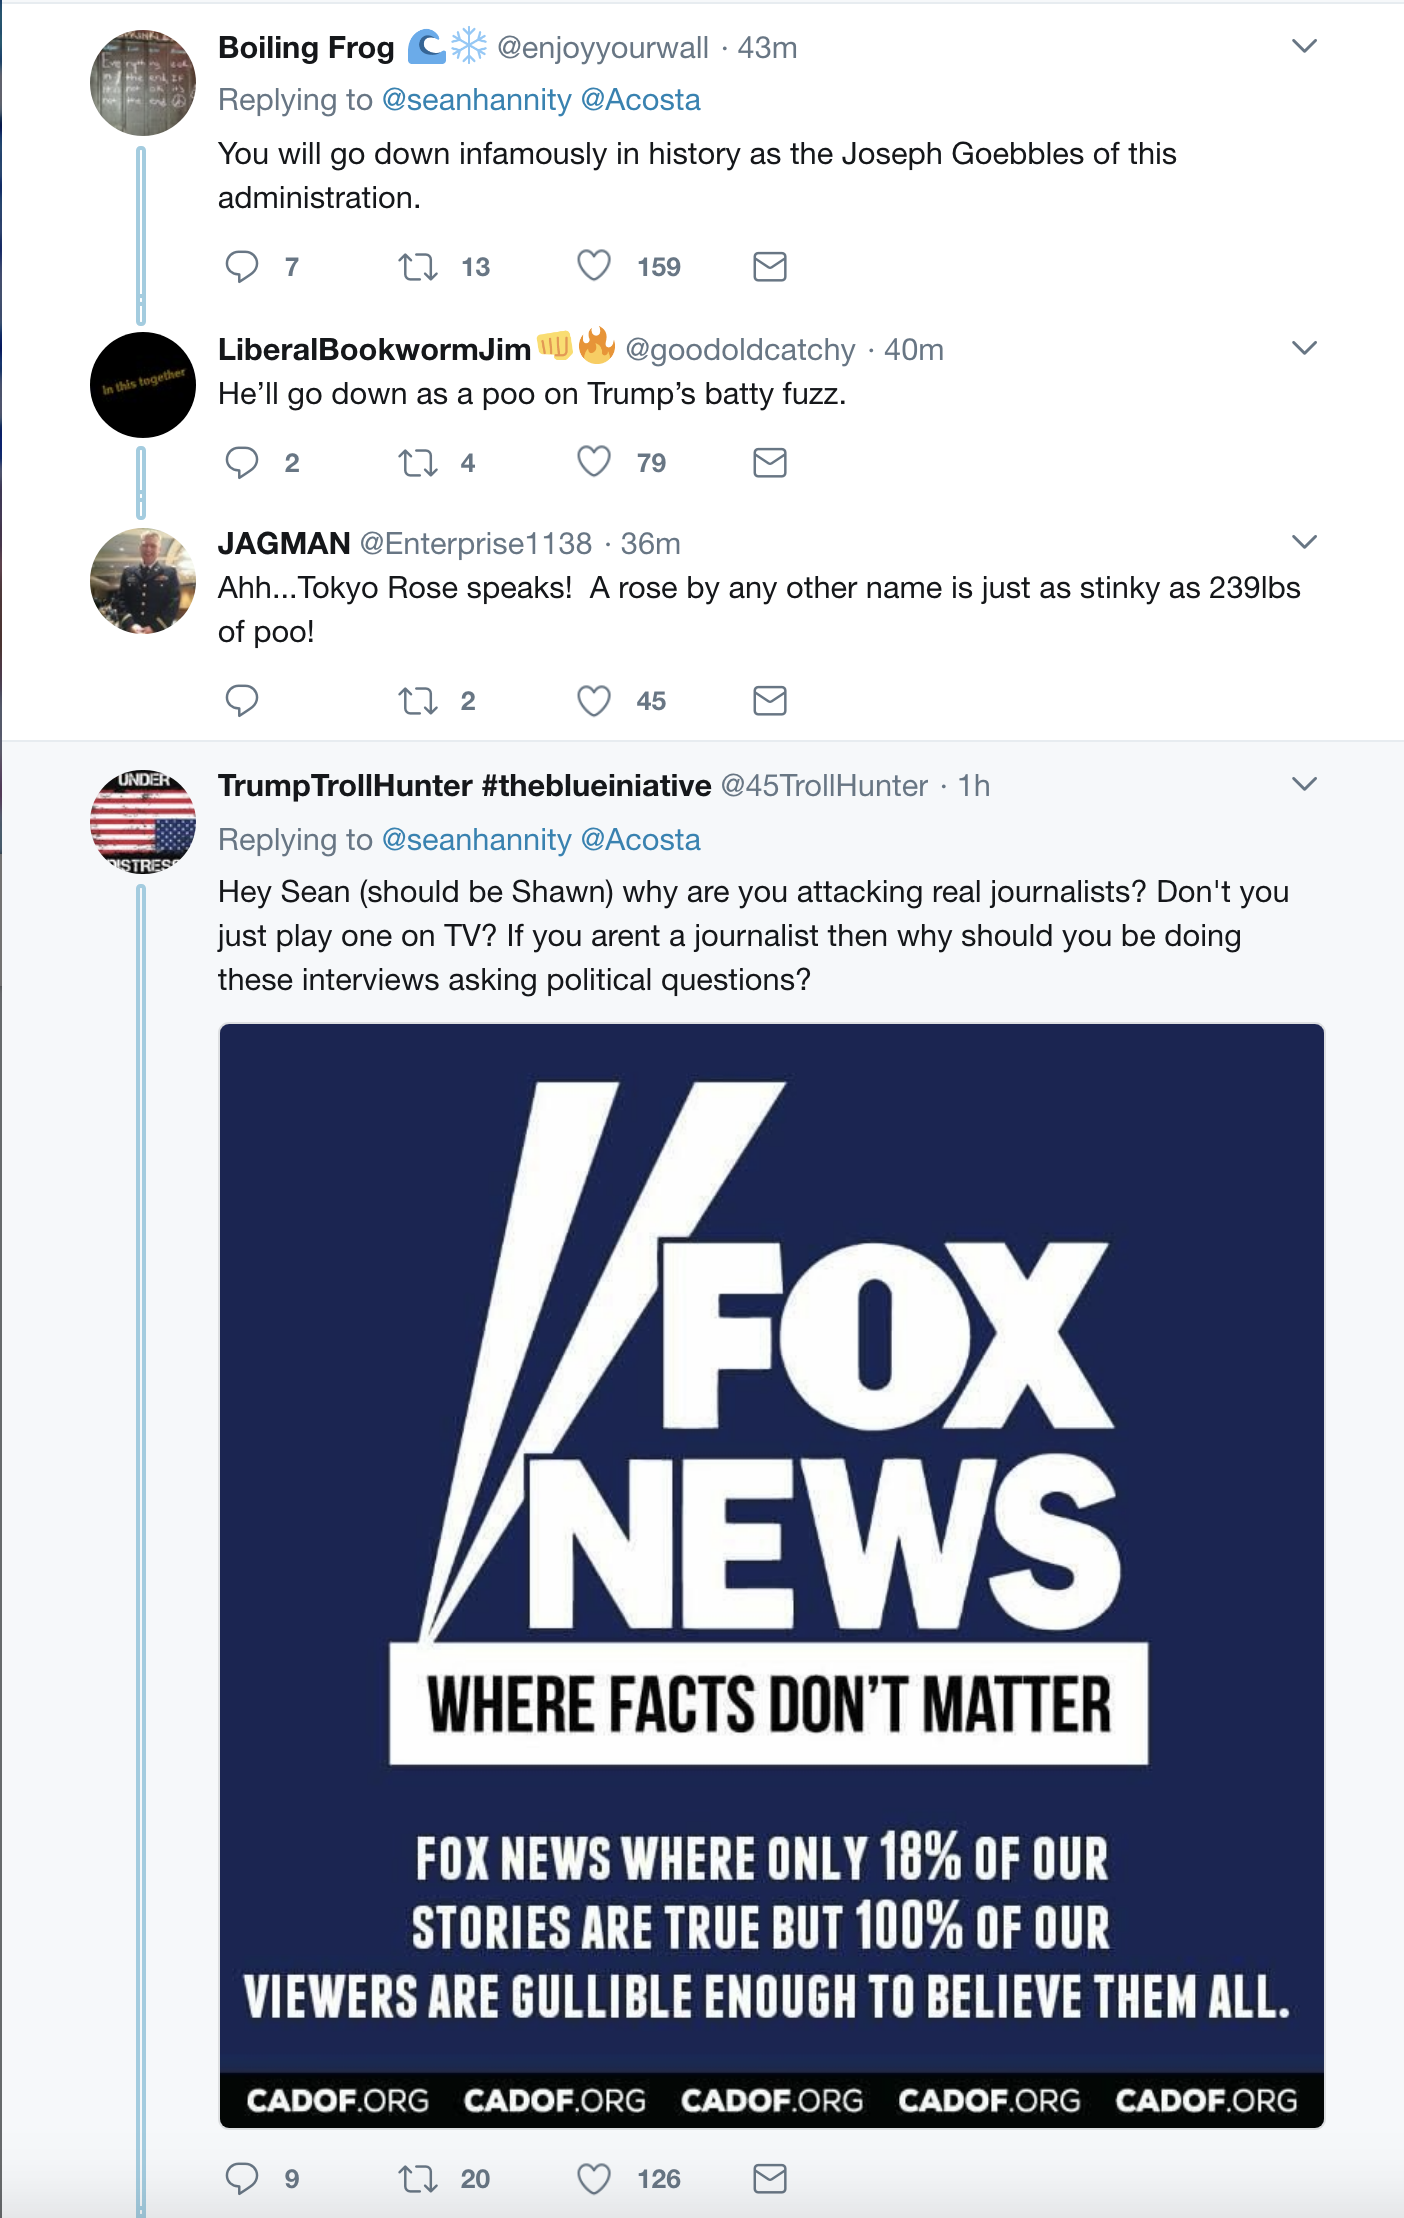 Screen-Shot-2018-08-02-at-8.23.34-AM CNN's Jim Acosta Humiliates Hannity On Twitter - Sean Goes Full Crybaby Like A Wimp Corruption Crime Election 2018 Media Politics Top Stories 